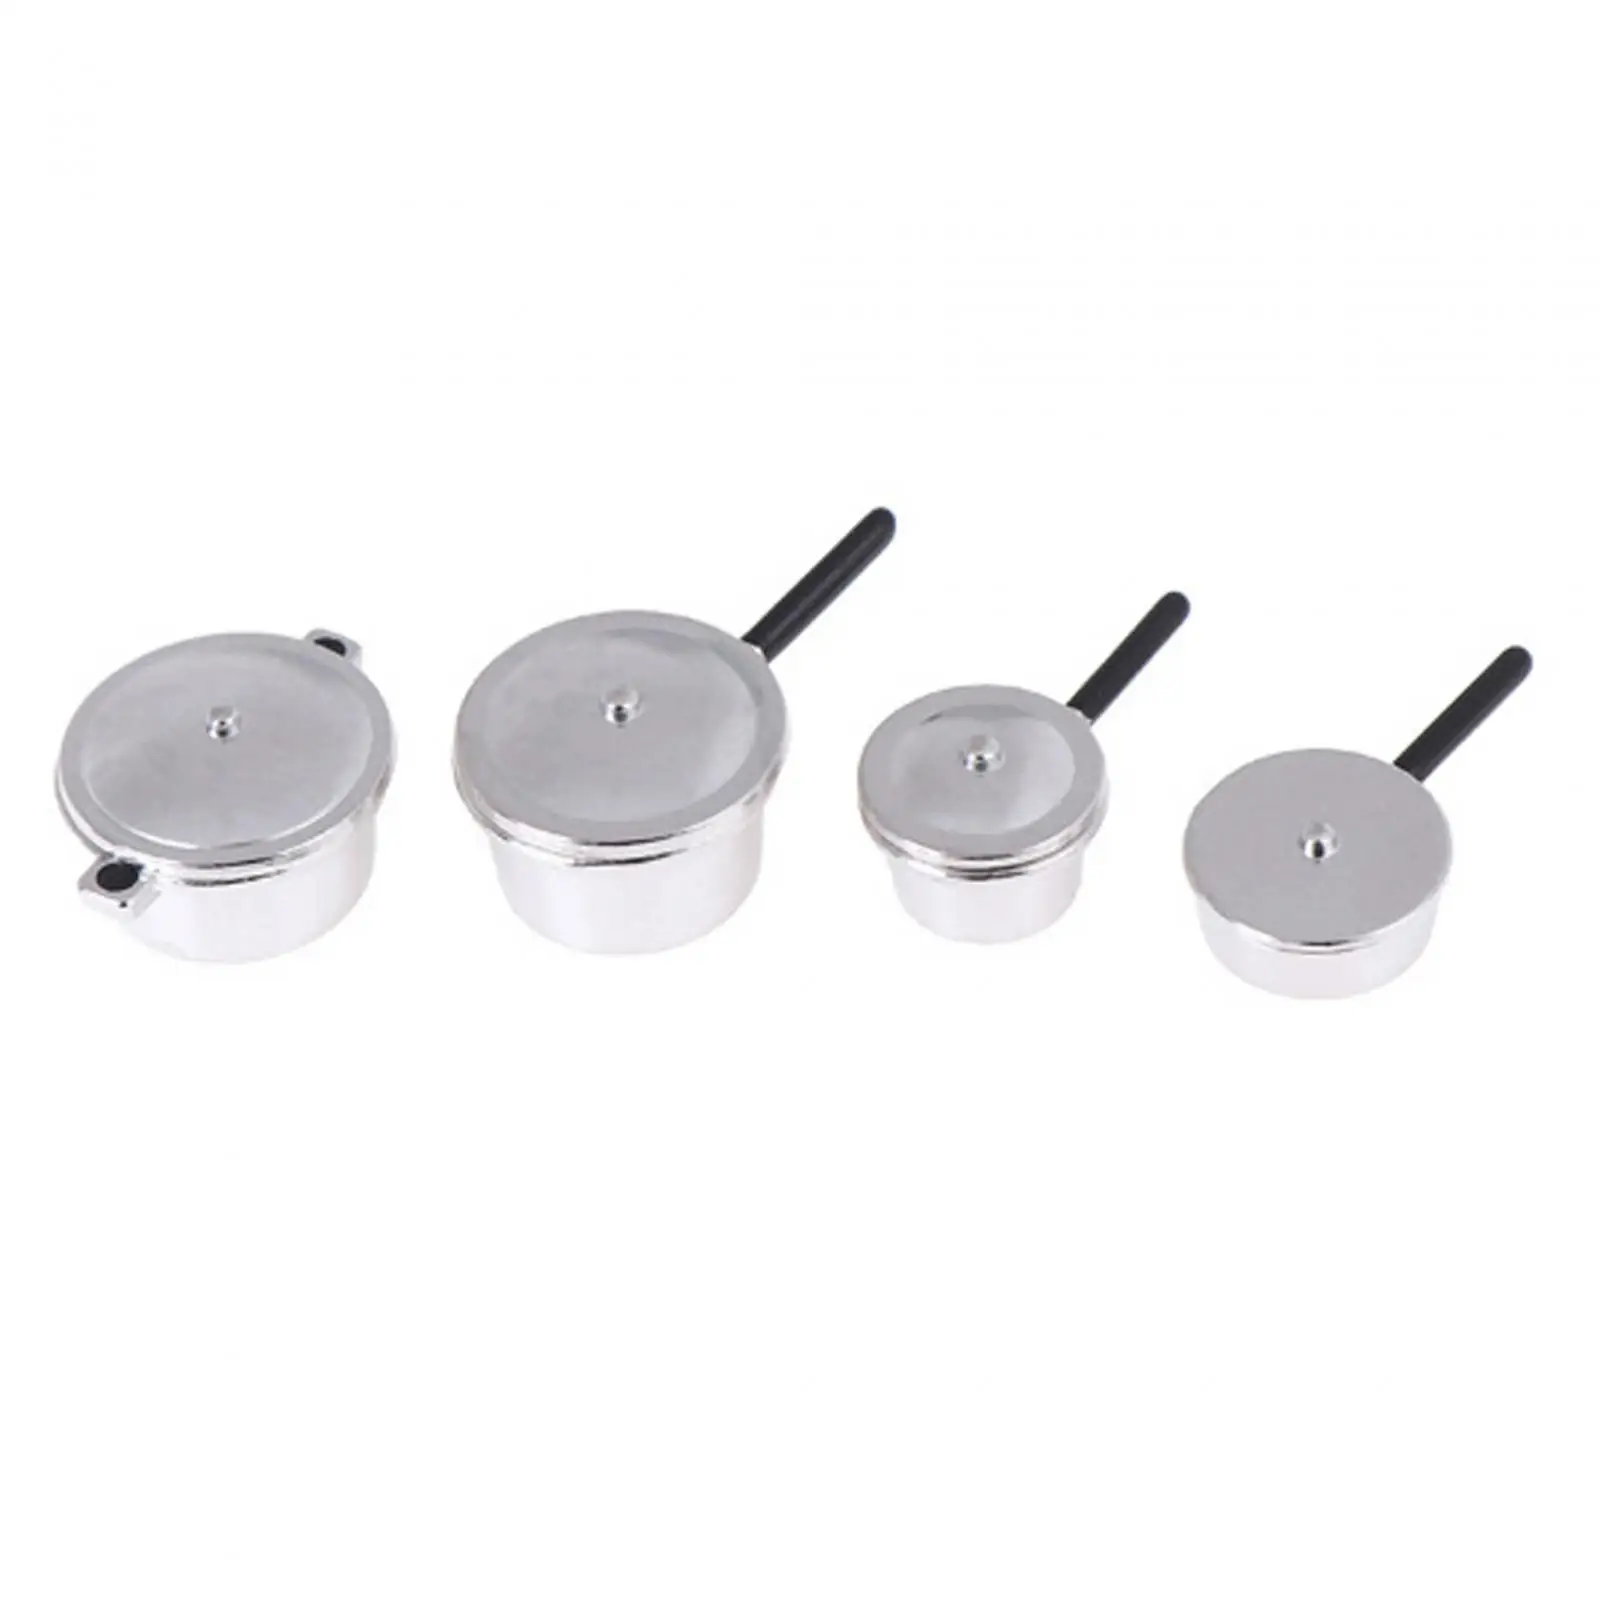 4 Pieces 1/12 Dollhouse Pots and Pans Set Collections Simulated Alloy for Accessories Decoration Micro Landscape Layout Building